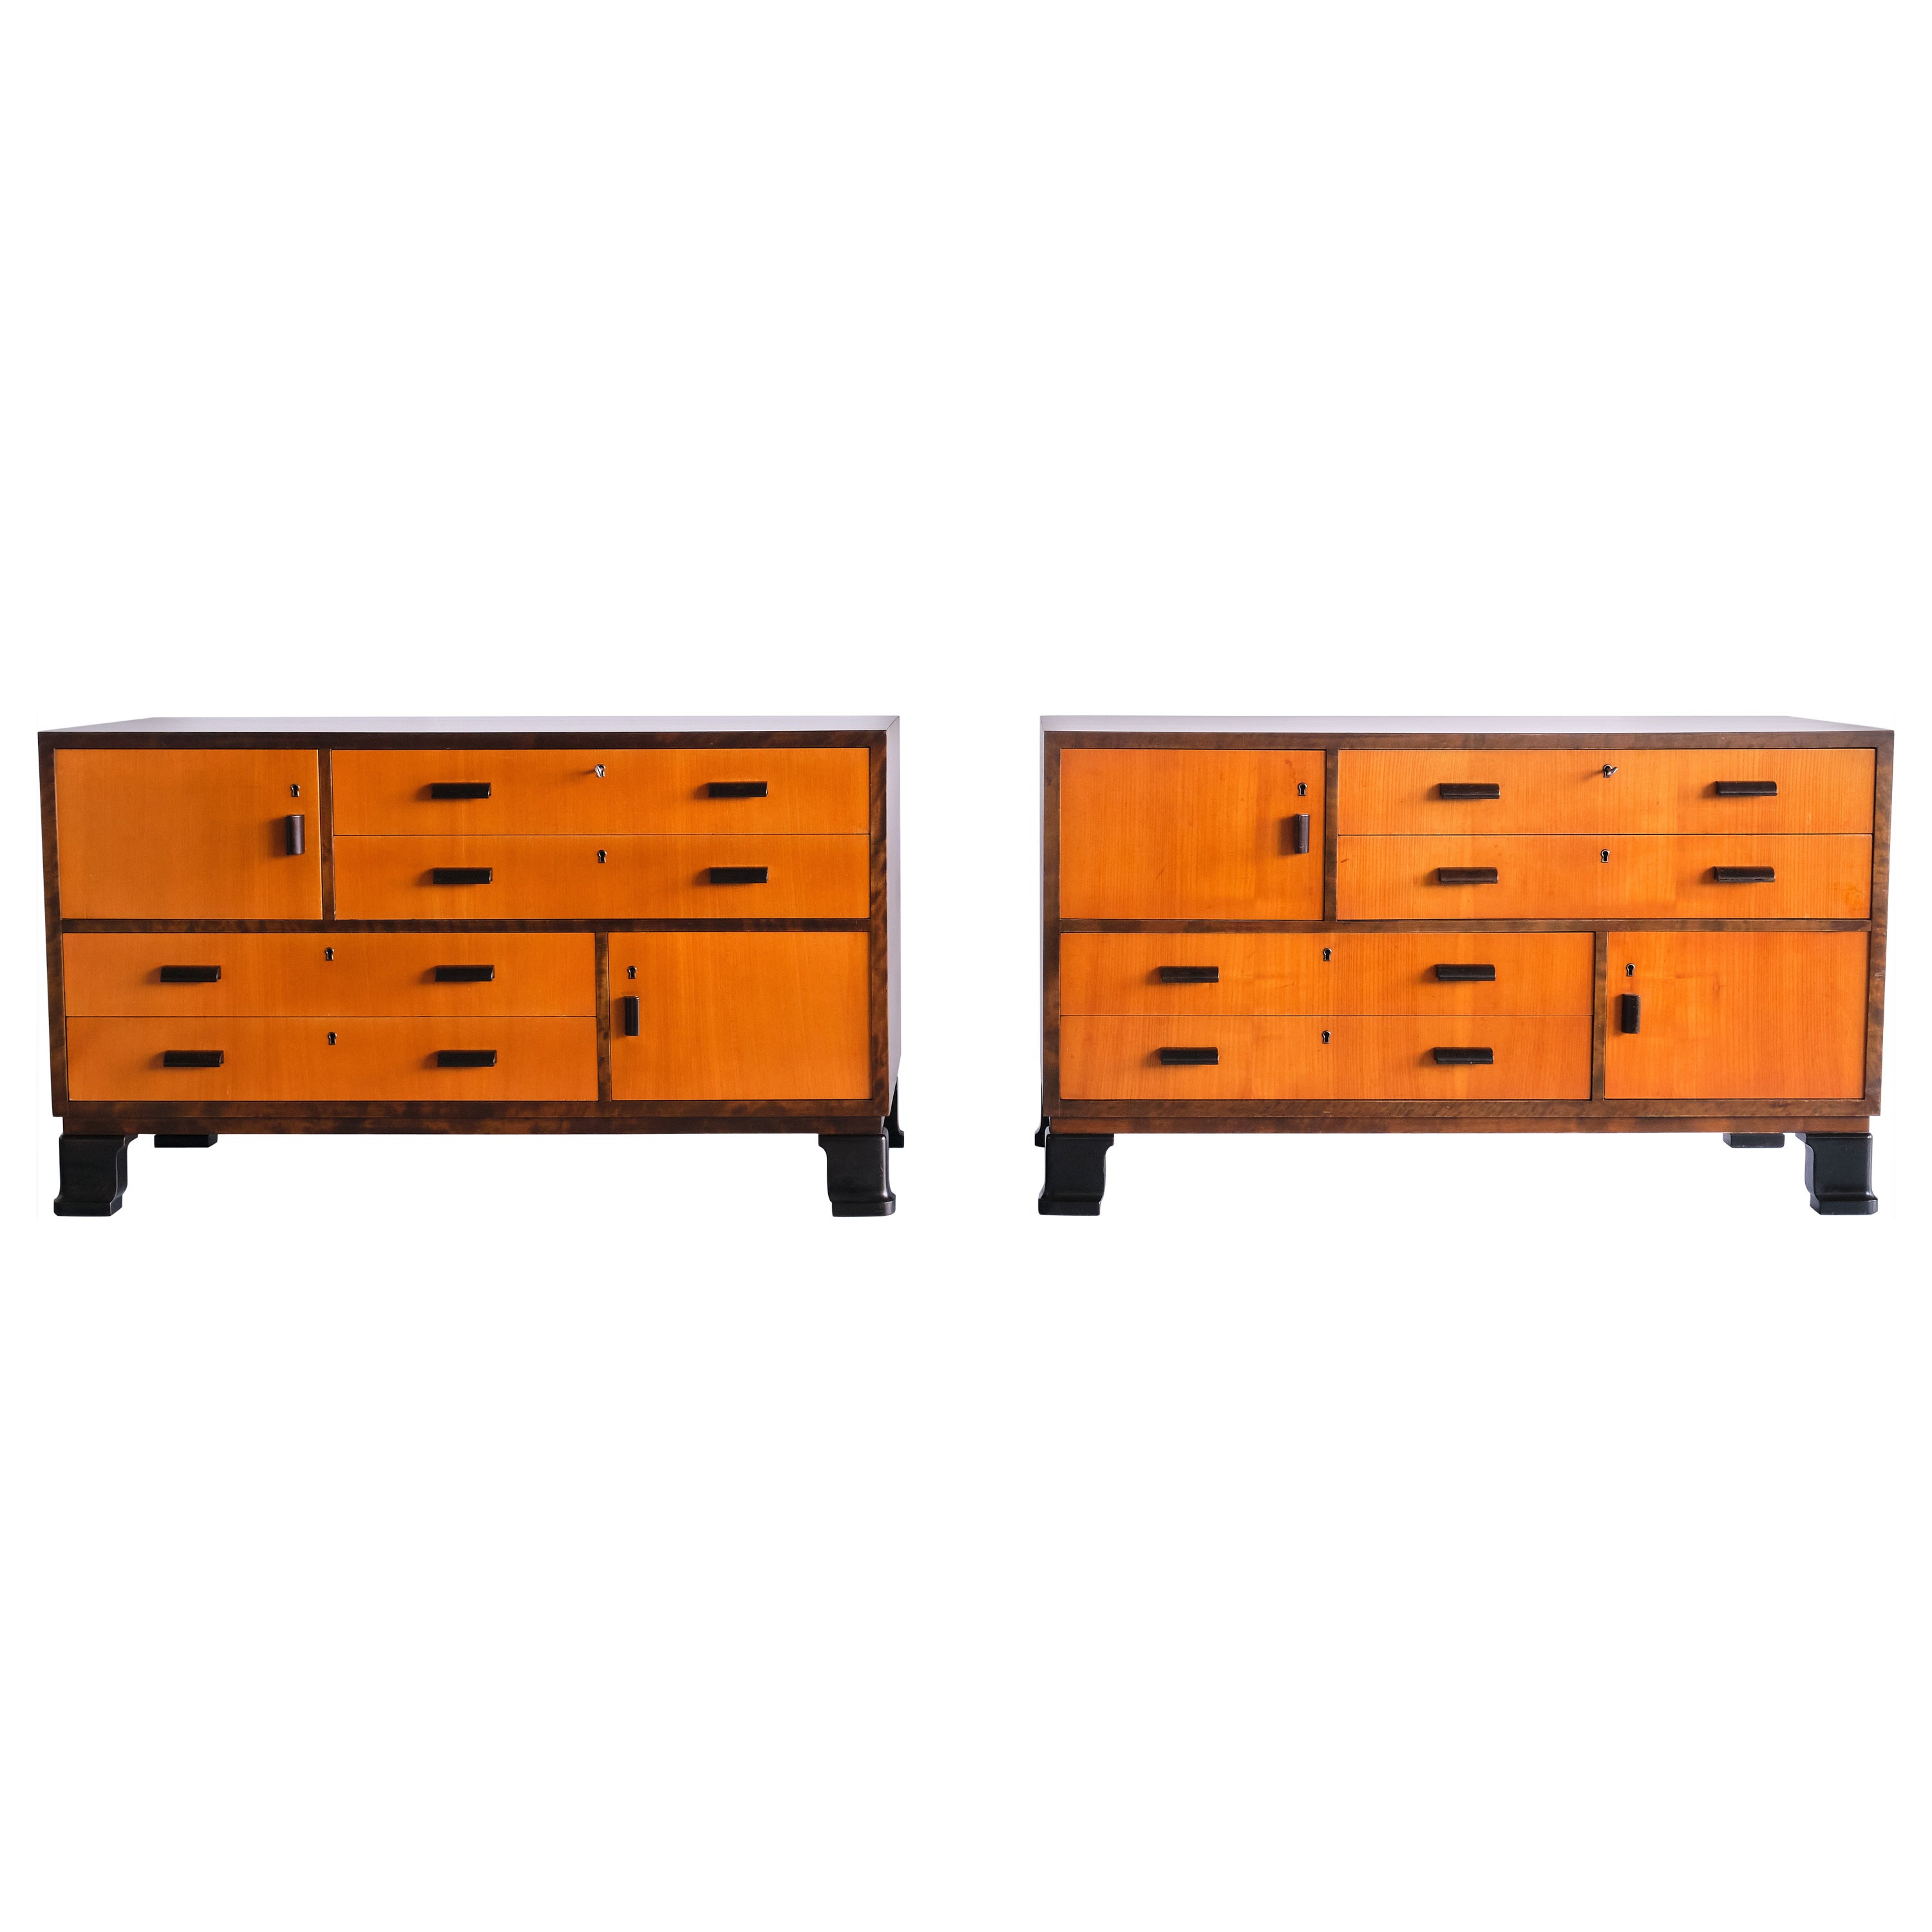 Pair of Axel Larsson Sideboards in Elm and Birch, SMF Bodafors, Sweden, 1940s For Sale